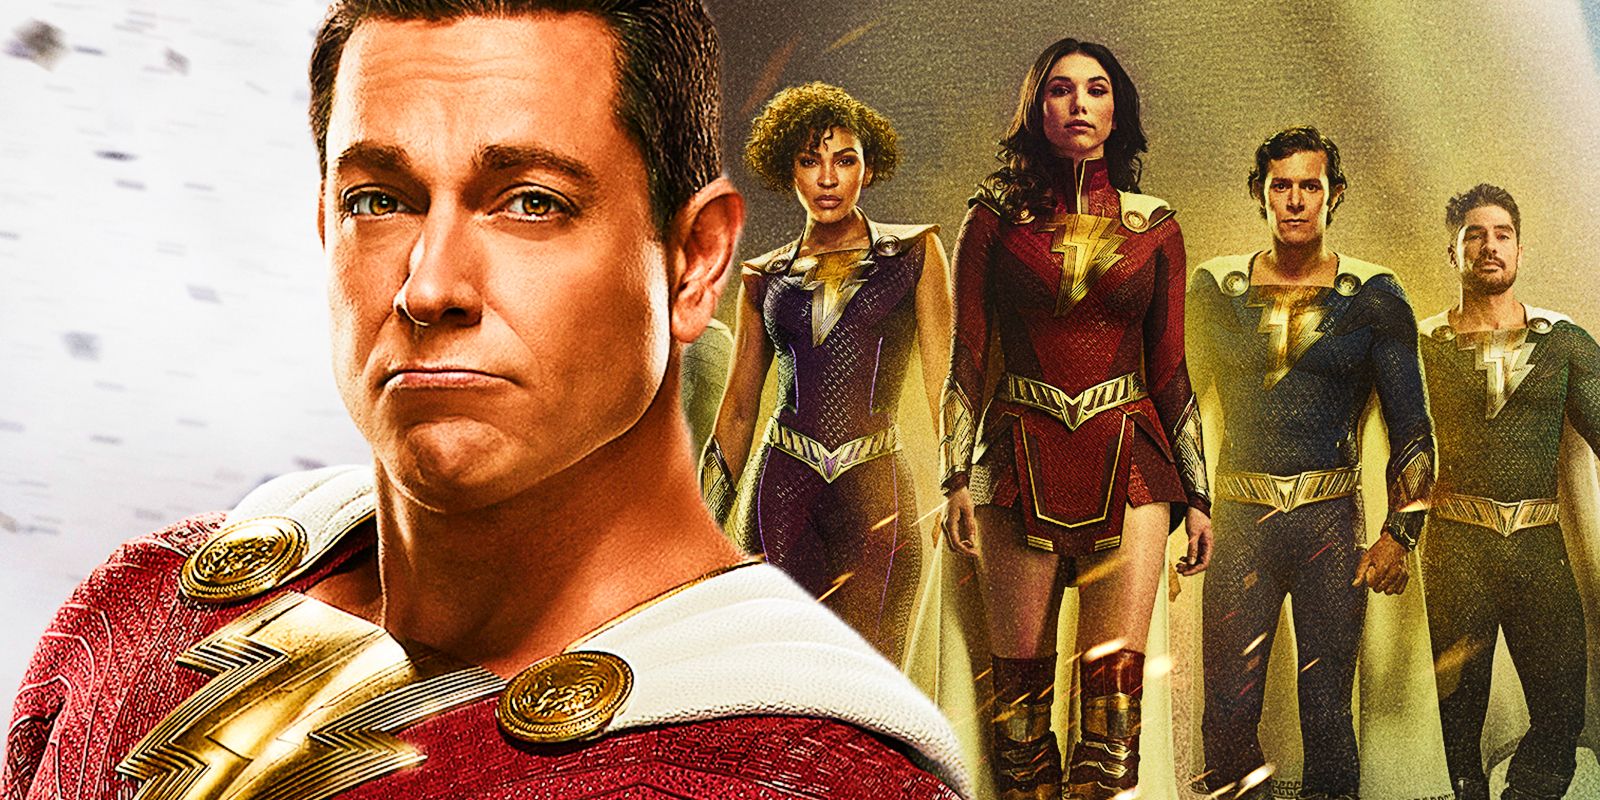 How Much Shazam 2 Cost To Make & Was It A Box Office Bomb?